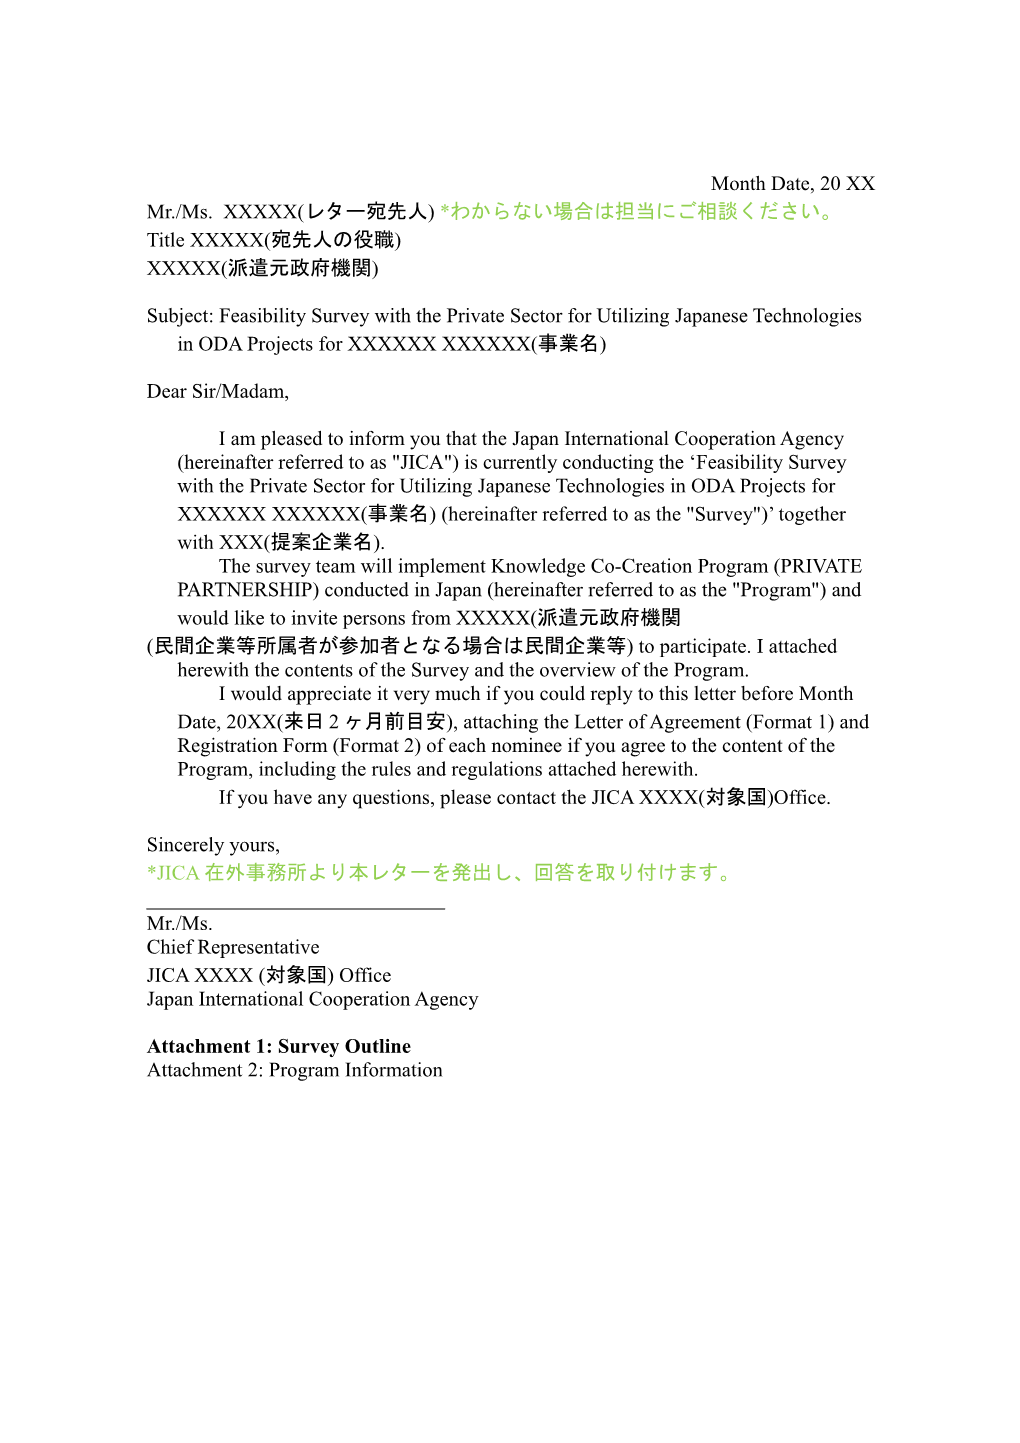 Subject: Feasibility Survey with the Private Sector for Utilizing Japanese Technologies